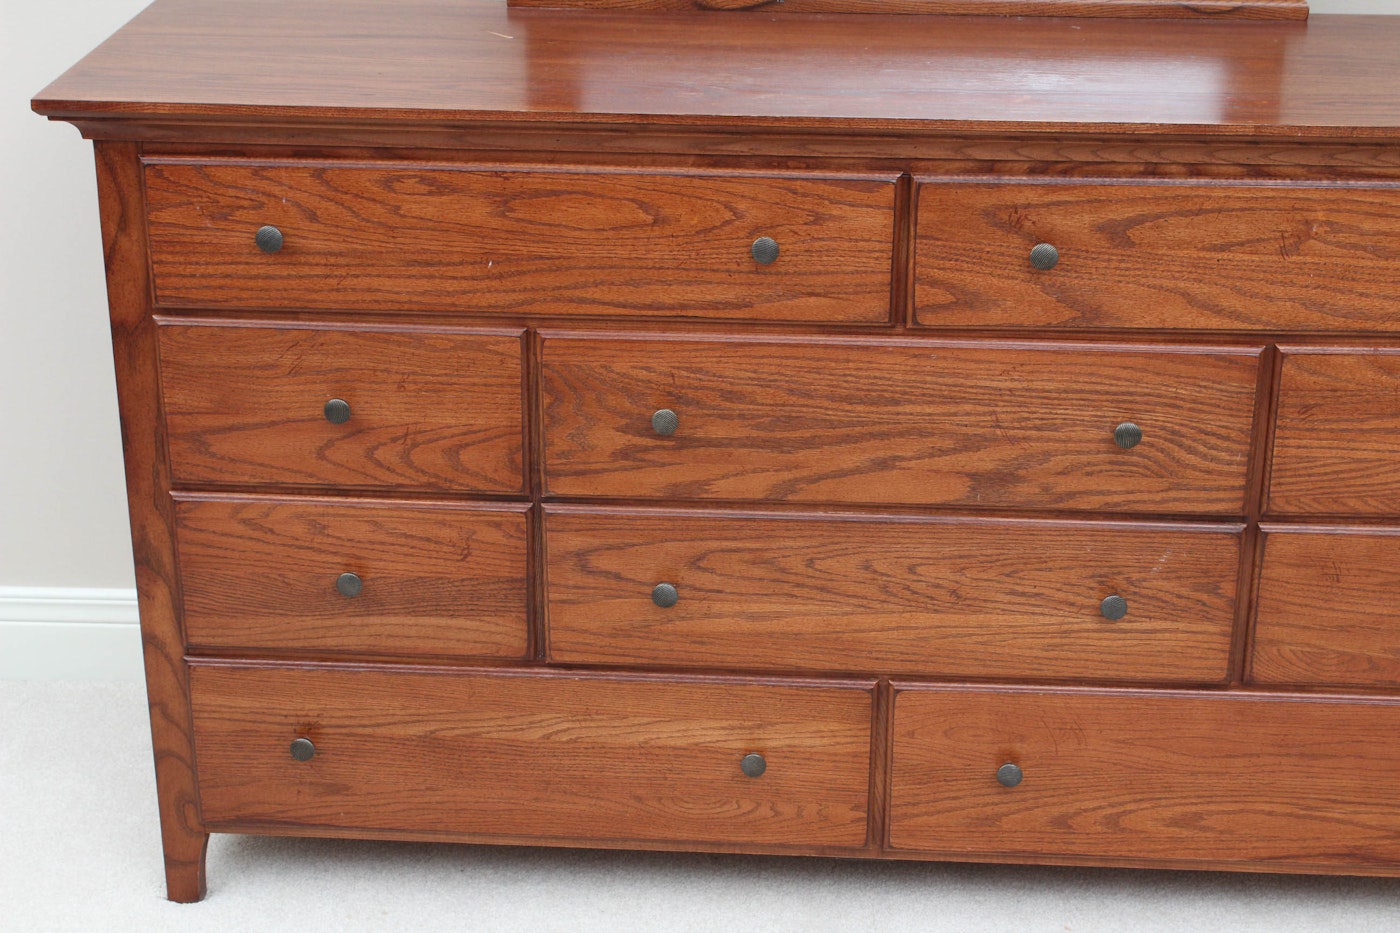 thomasville impressions gloss cherry bedroom furniture